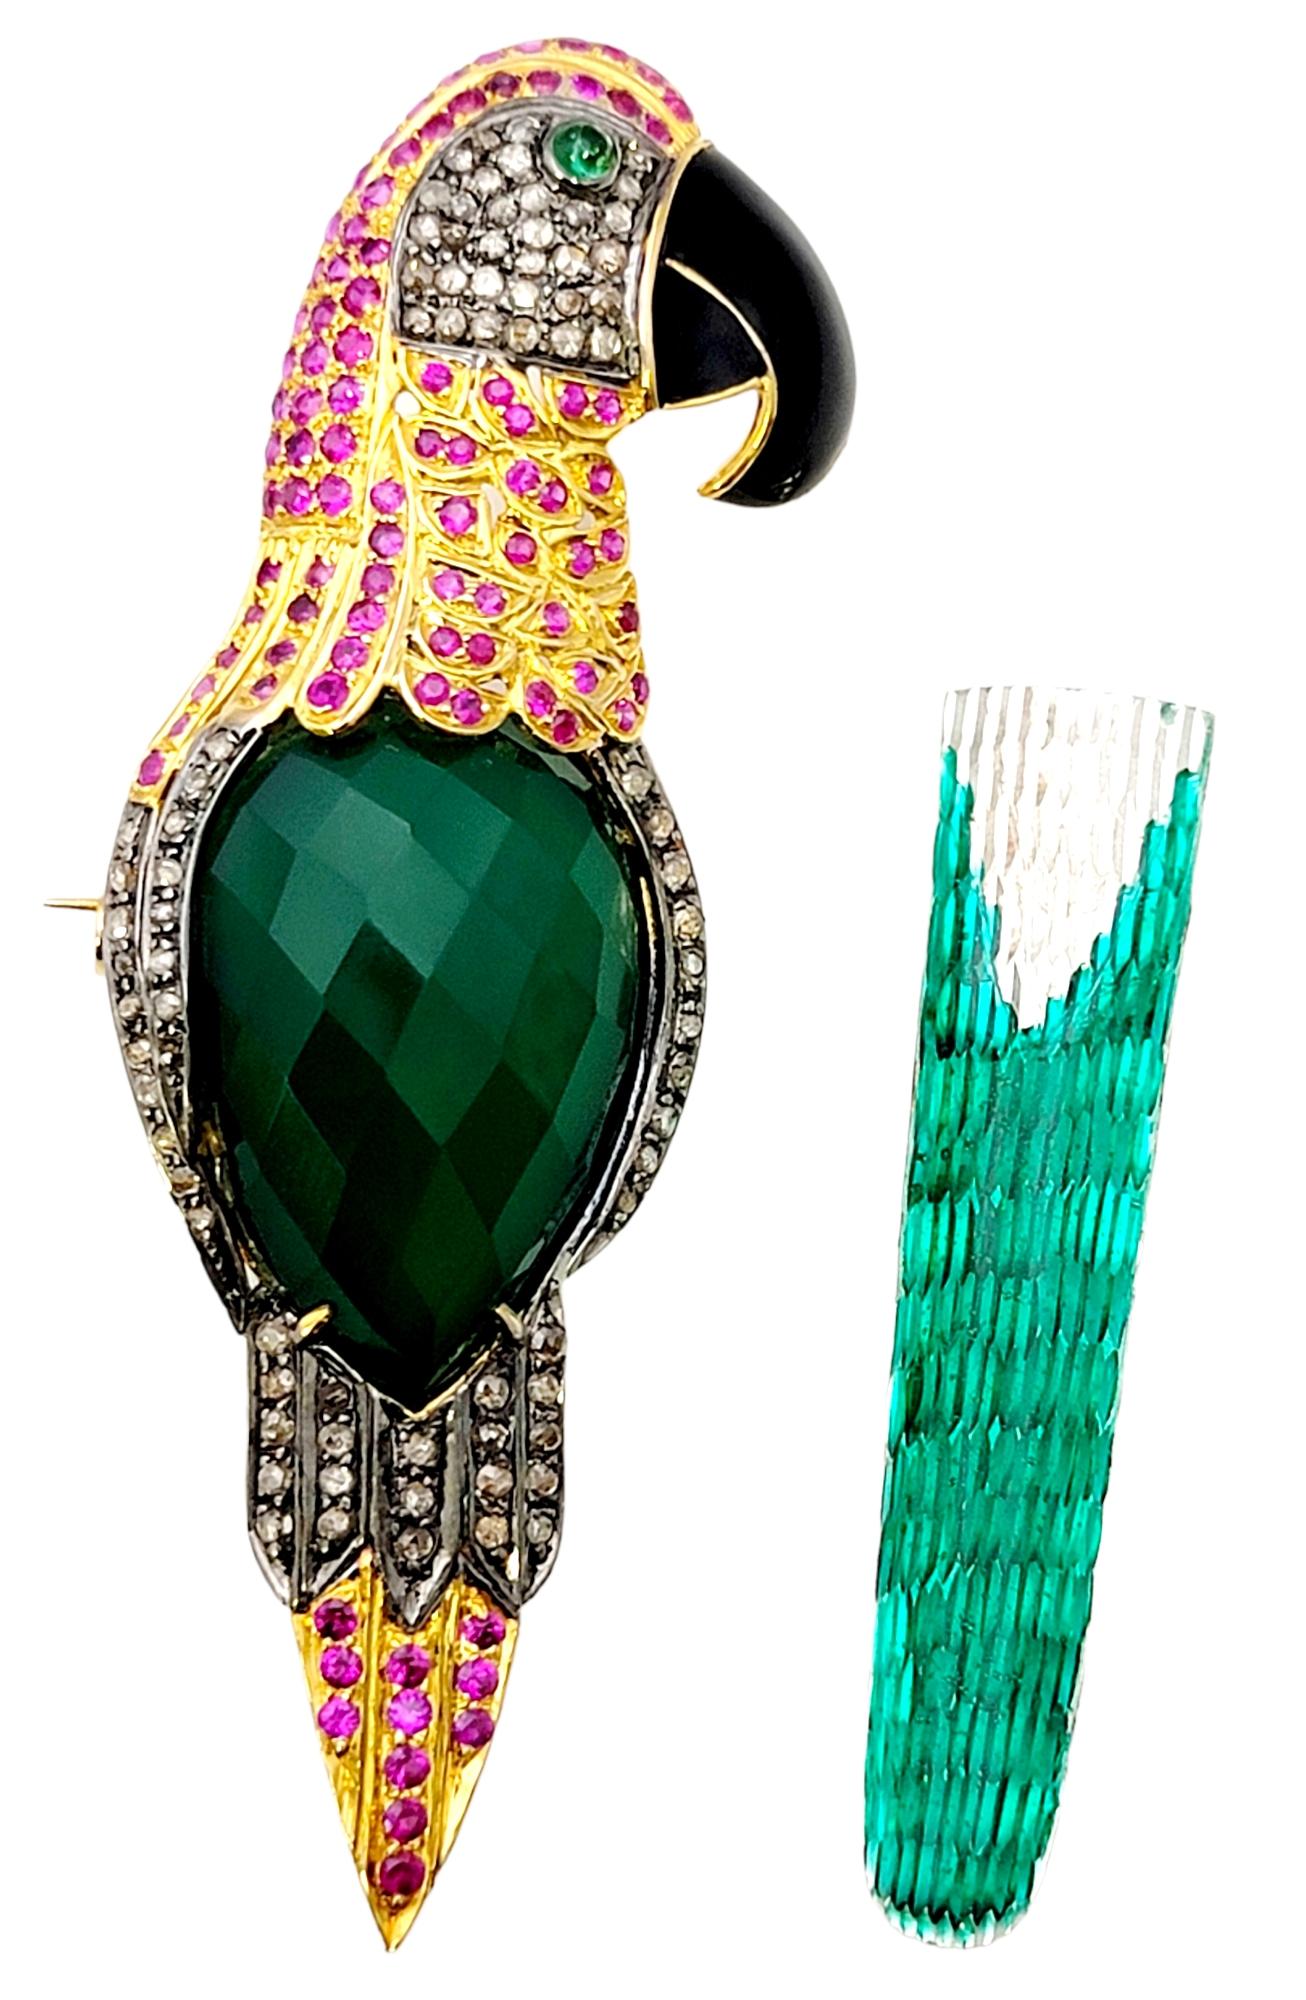 Fabulously bold macaw brooch / pendant bursting with personality! This beautifully detailed bird brooch is filled with glittering diamonds and colorful gemstones including pink sapphires, chalcedony and emerald. The green enamel tail can be easily